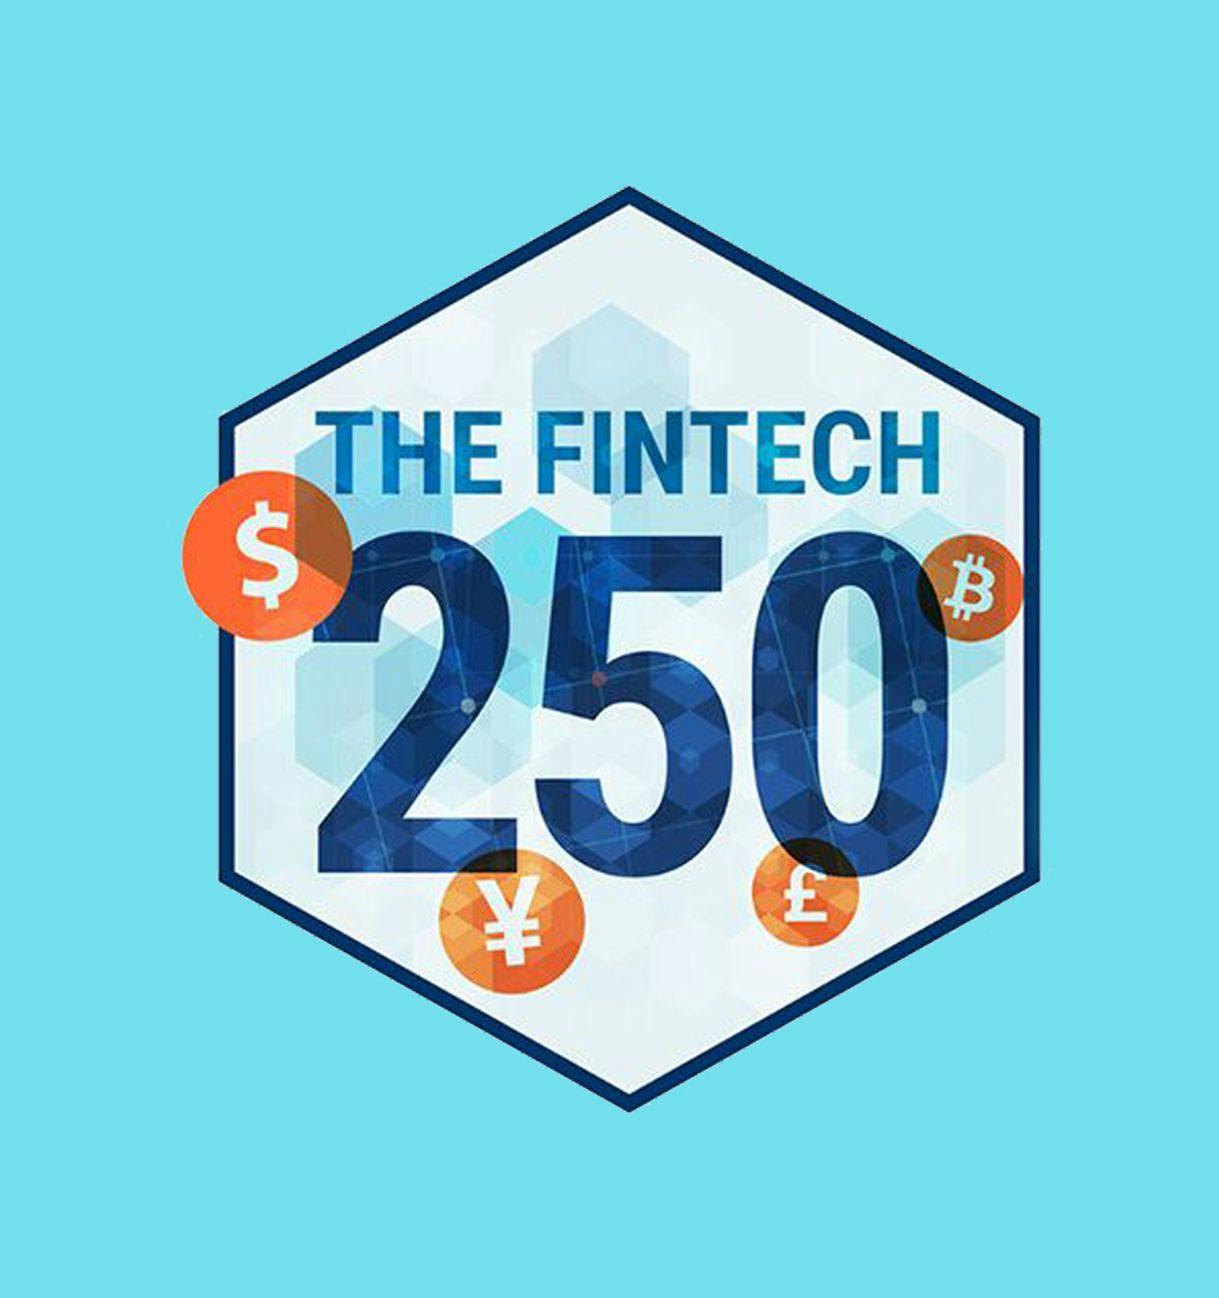 Featured Image for Coalition is named to Fintech 250